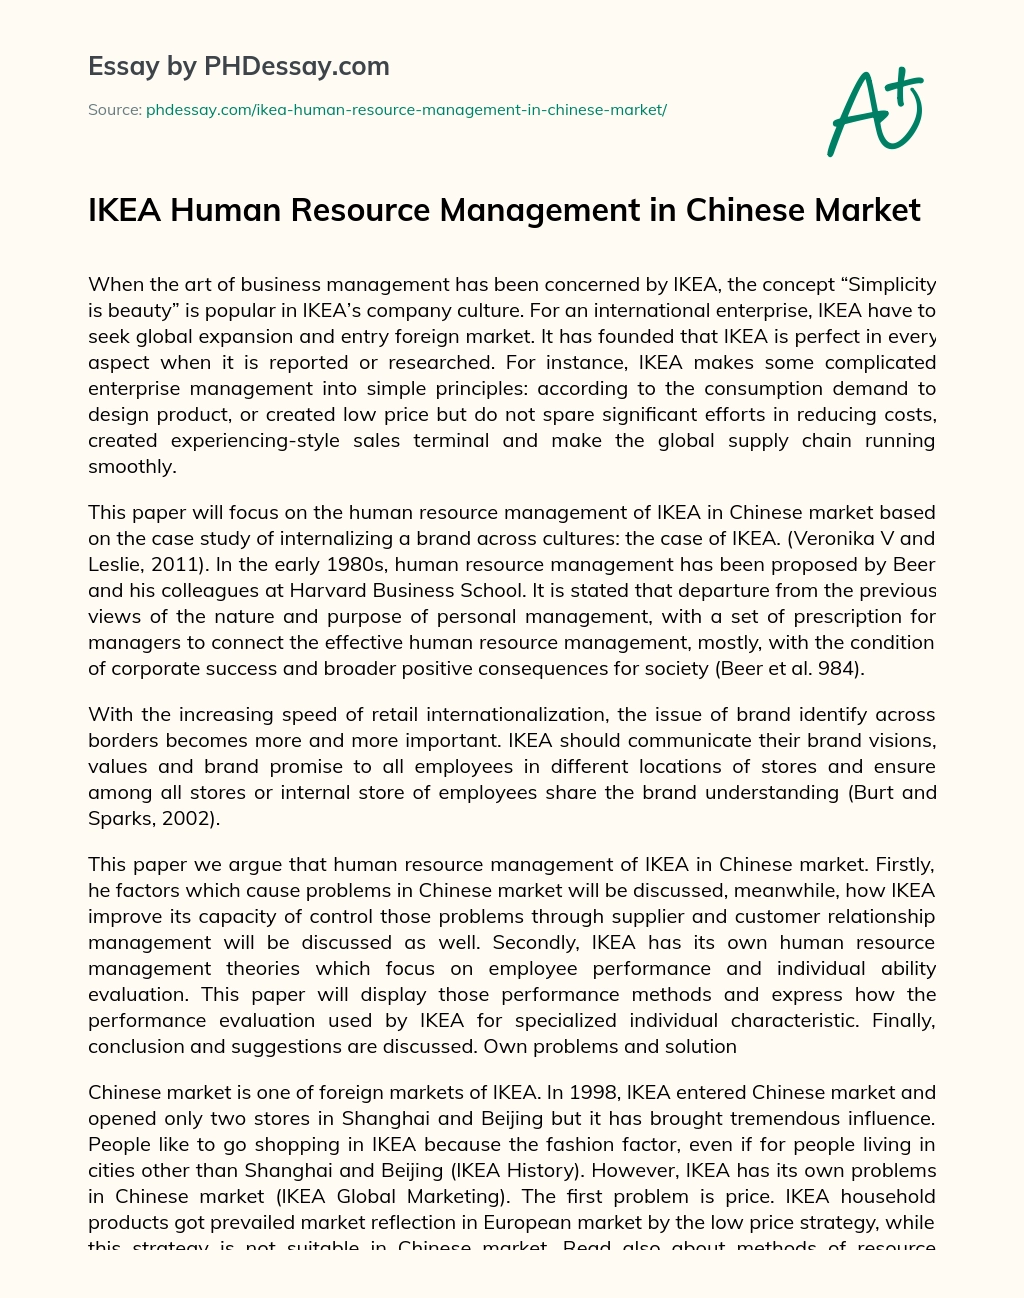 IKEA Human Resource Management in Chinese Market essay